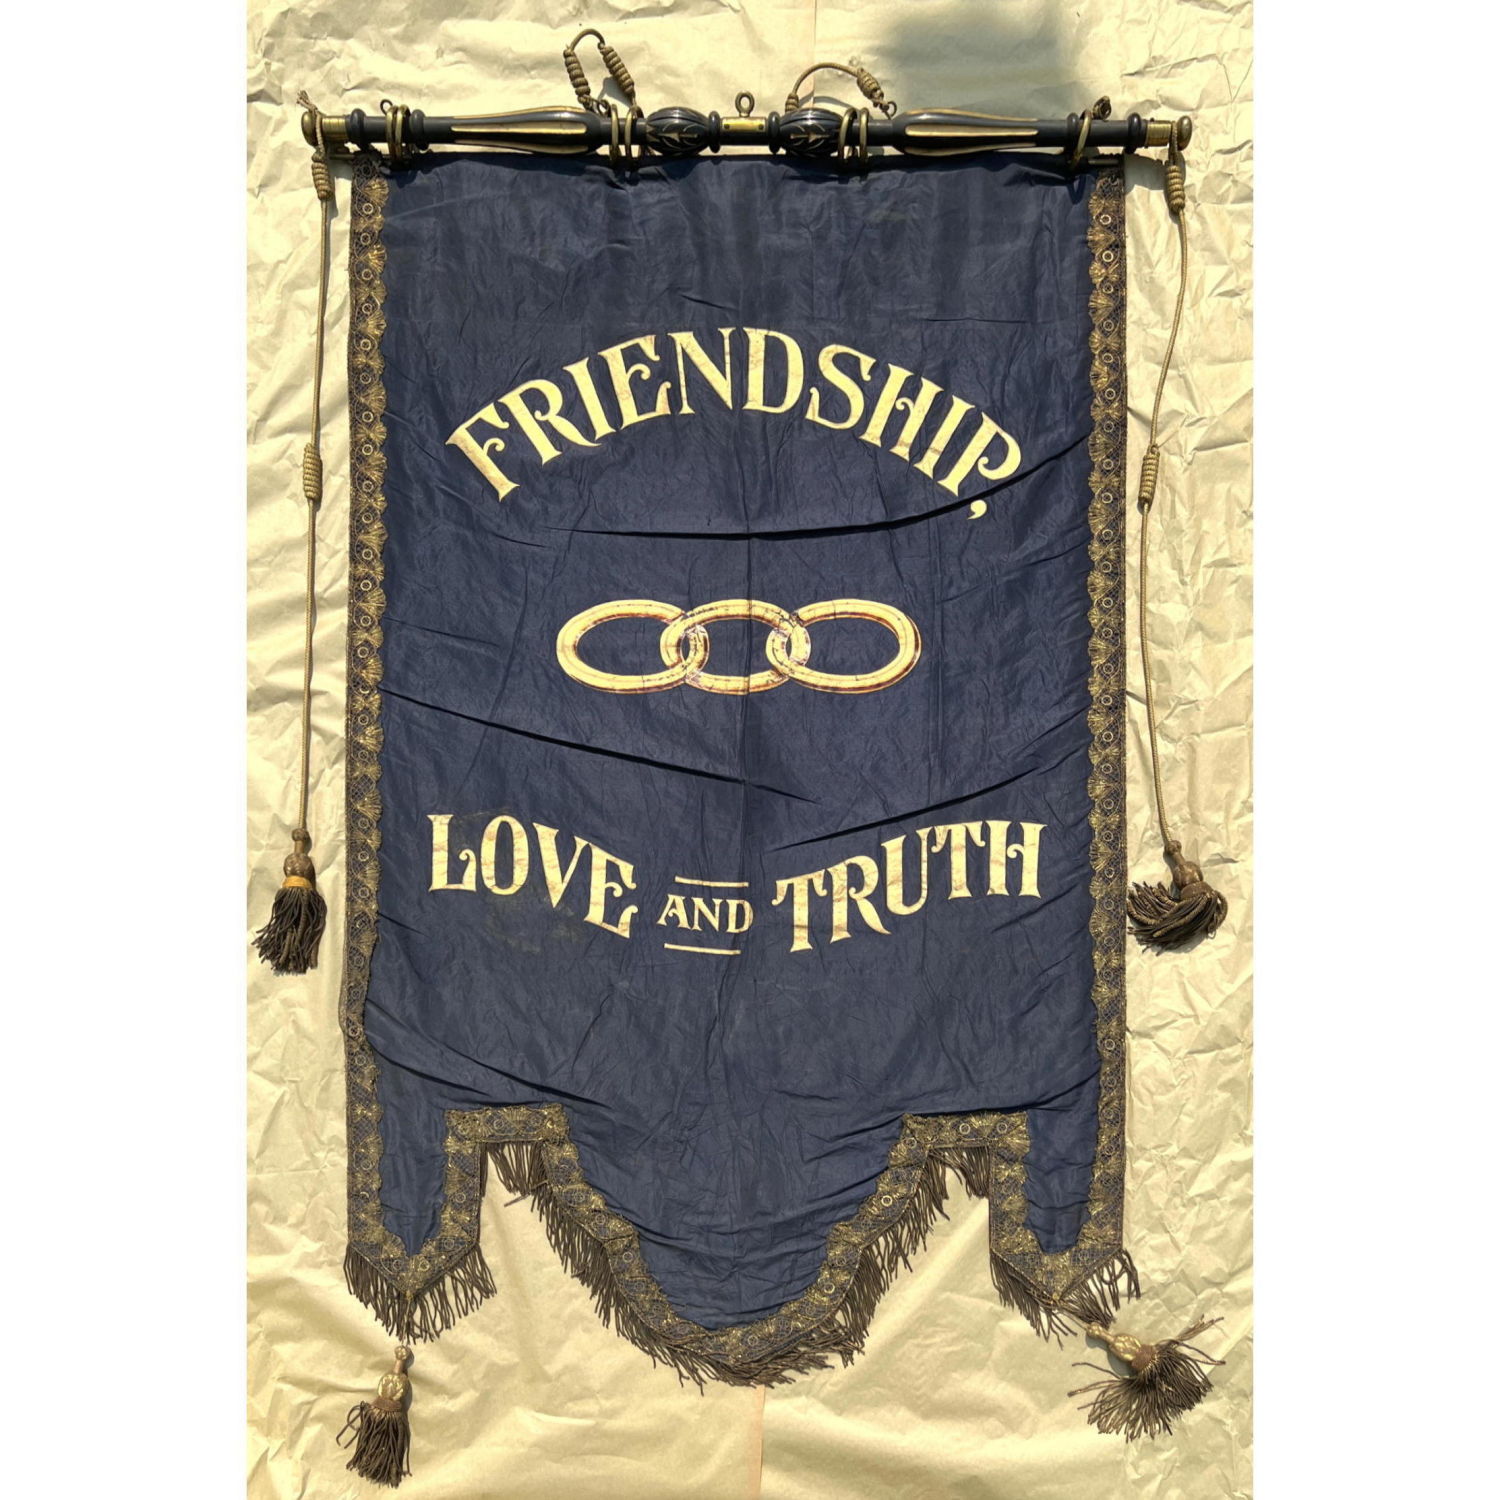 Antique Friendship, Love and Truth